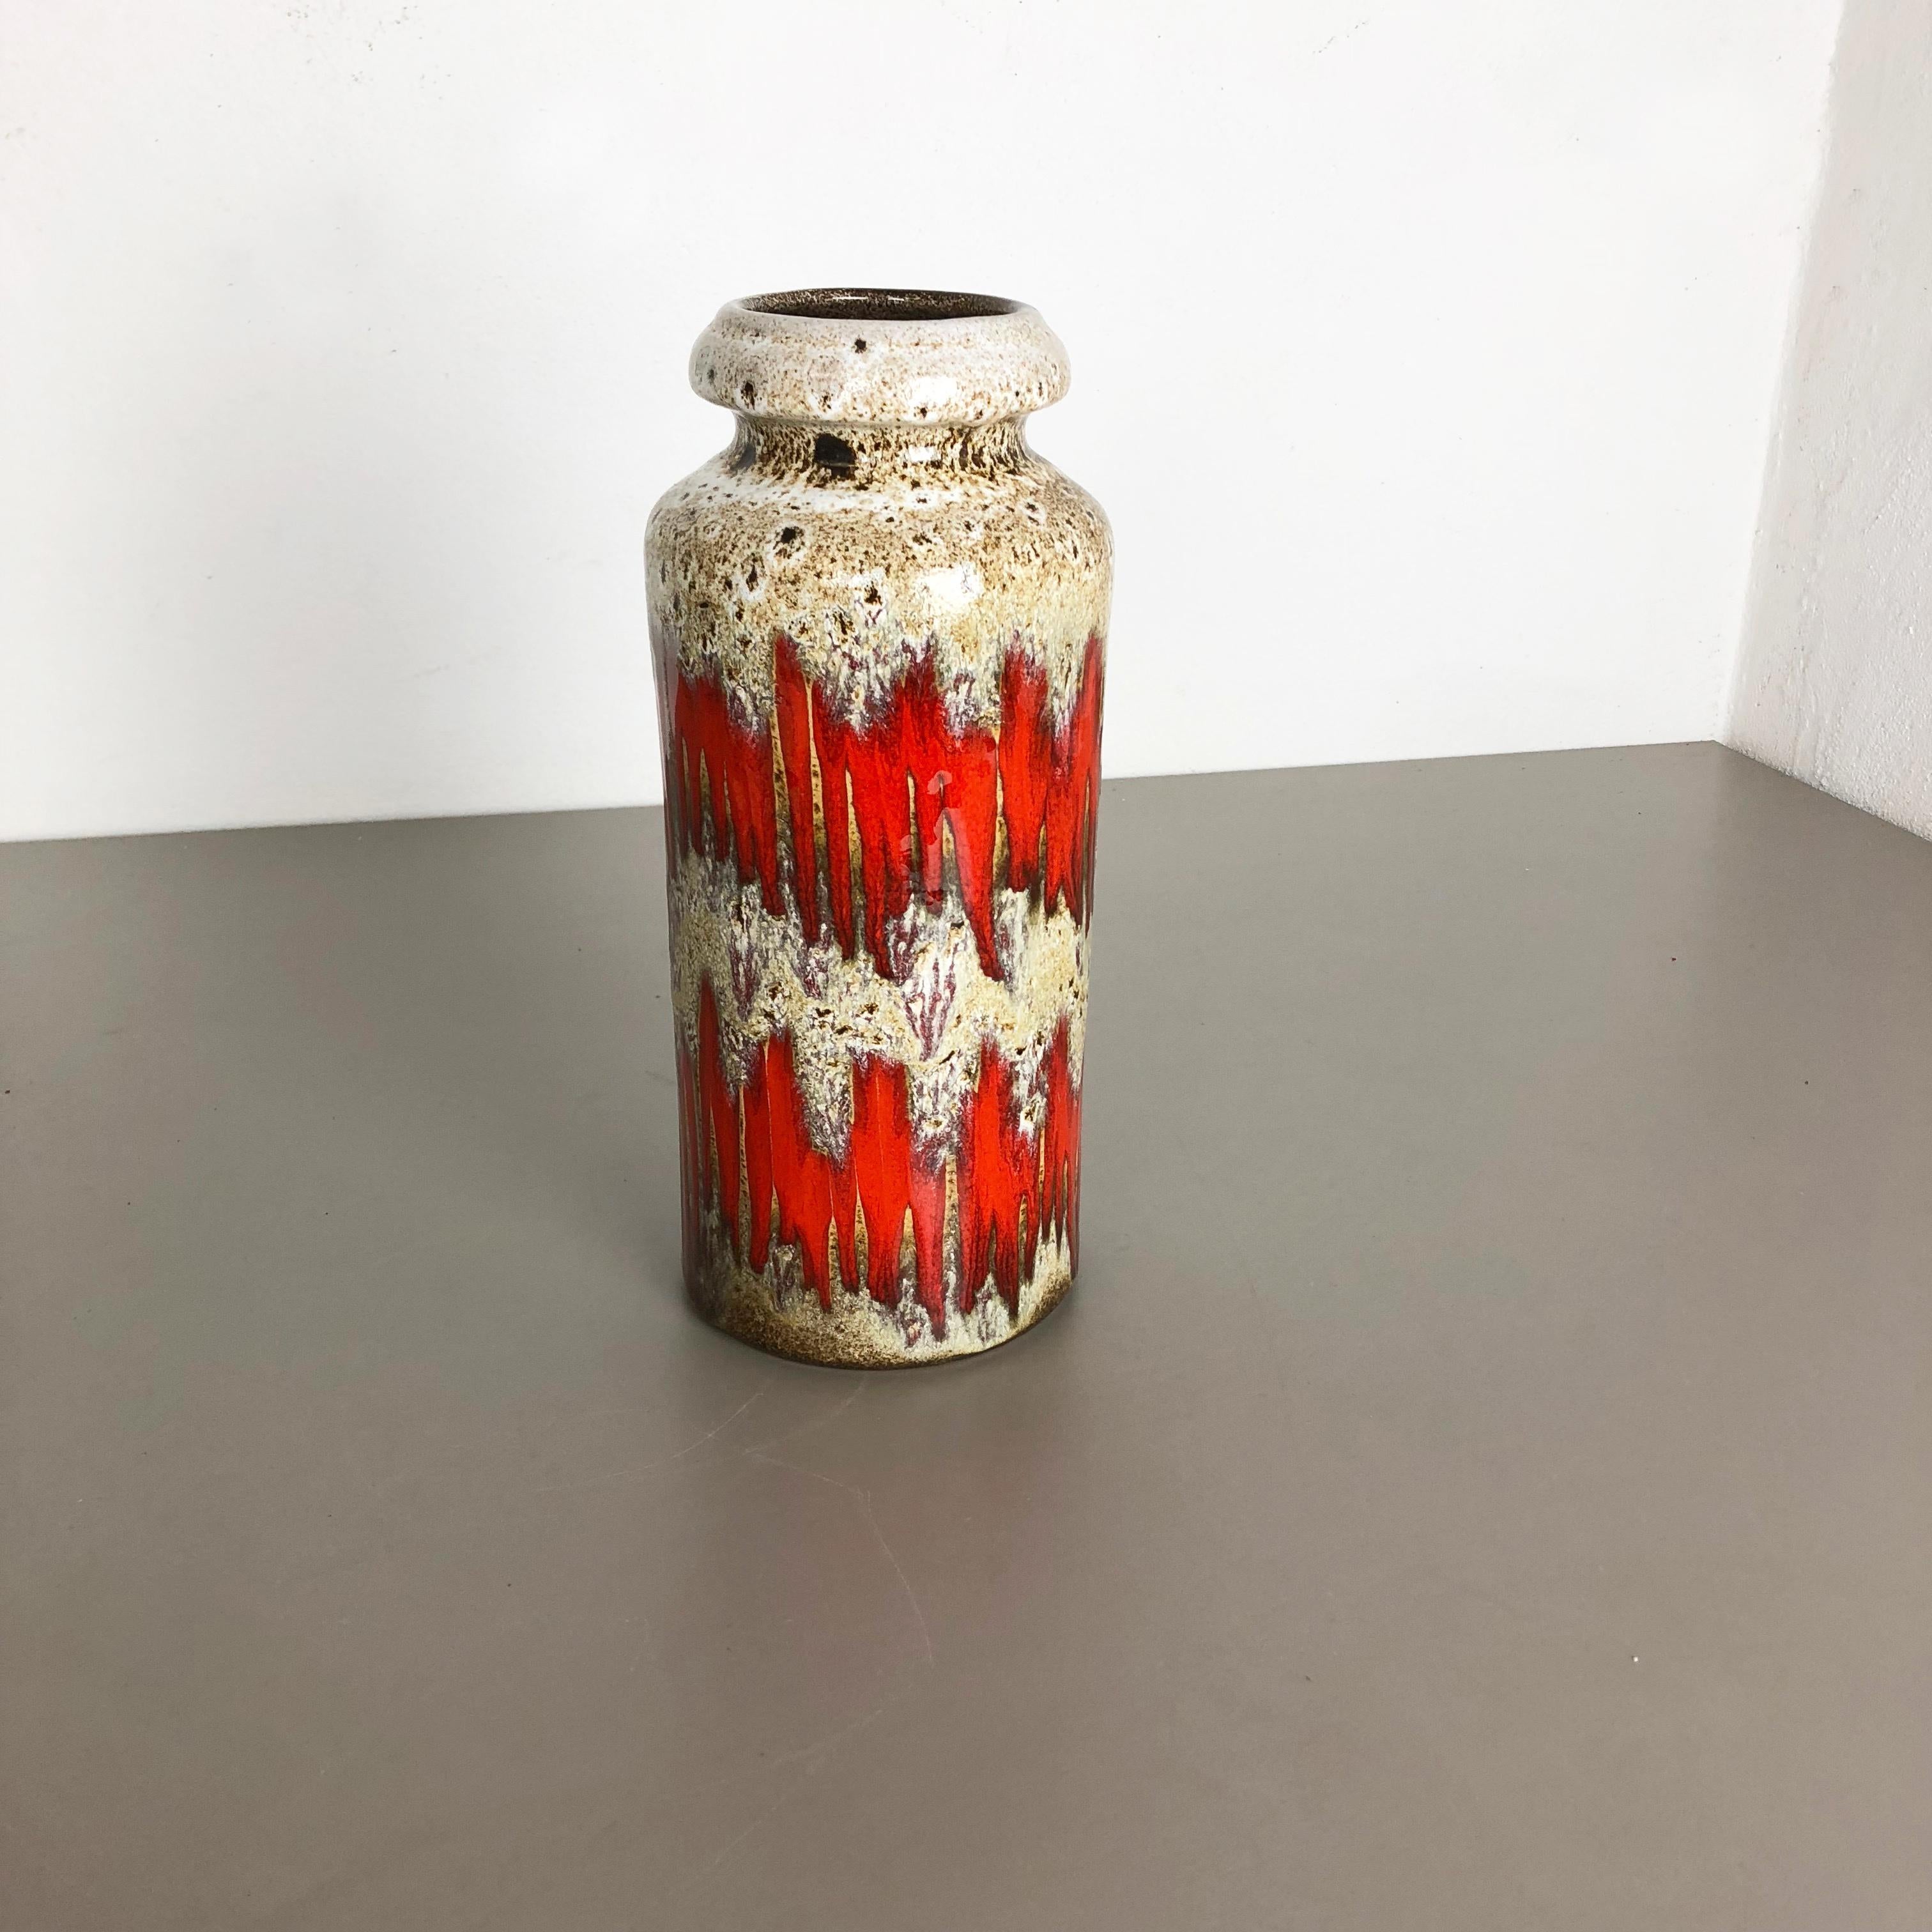 Article:

Pottery ceramic vase

Fat lava


Producer:

Scheurich, Germany


Decade:

1970s


Origin:

Germany



Original vintage 1970s pottery ceramic vase in Germany. High quality German production with a nice abstract